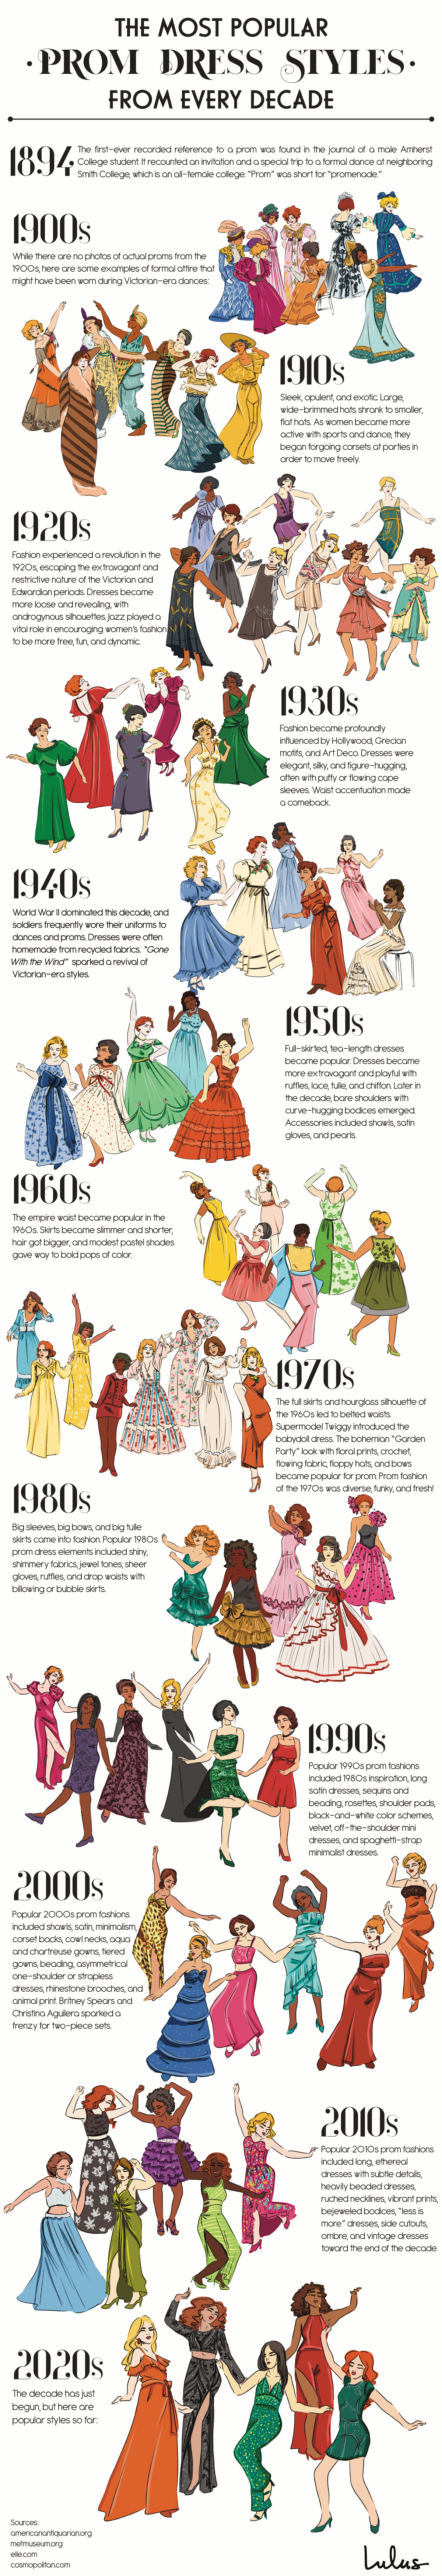 prom-dresses-over-time-chartistry